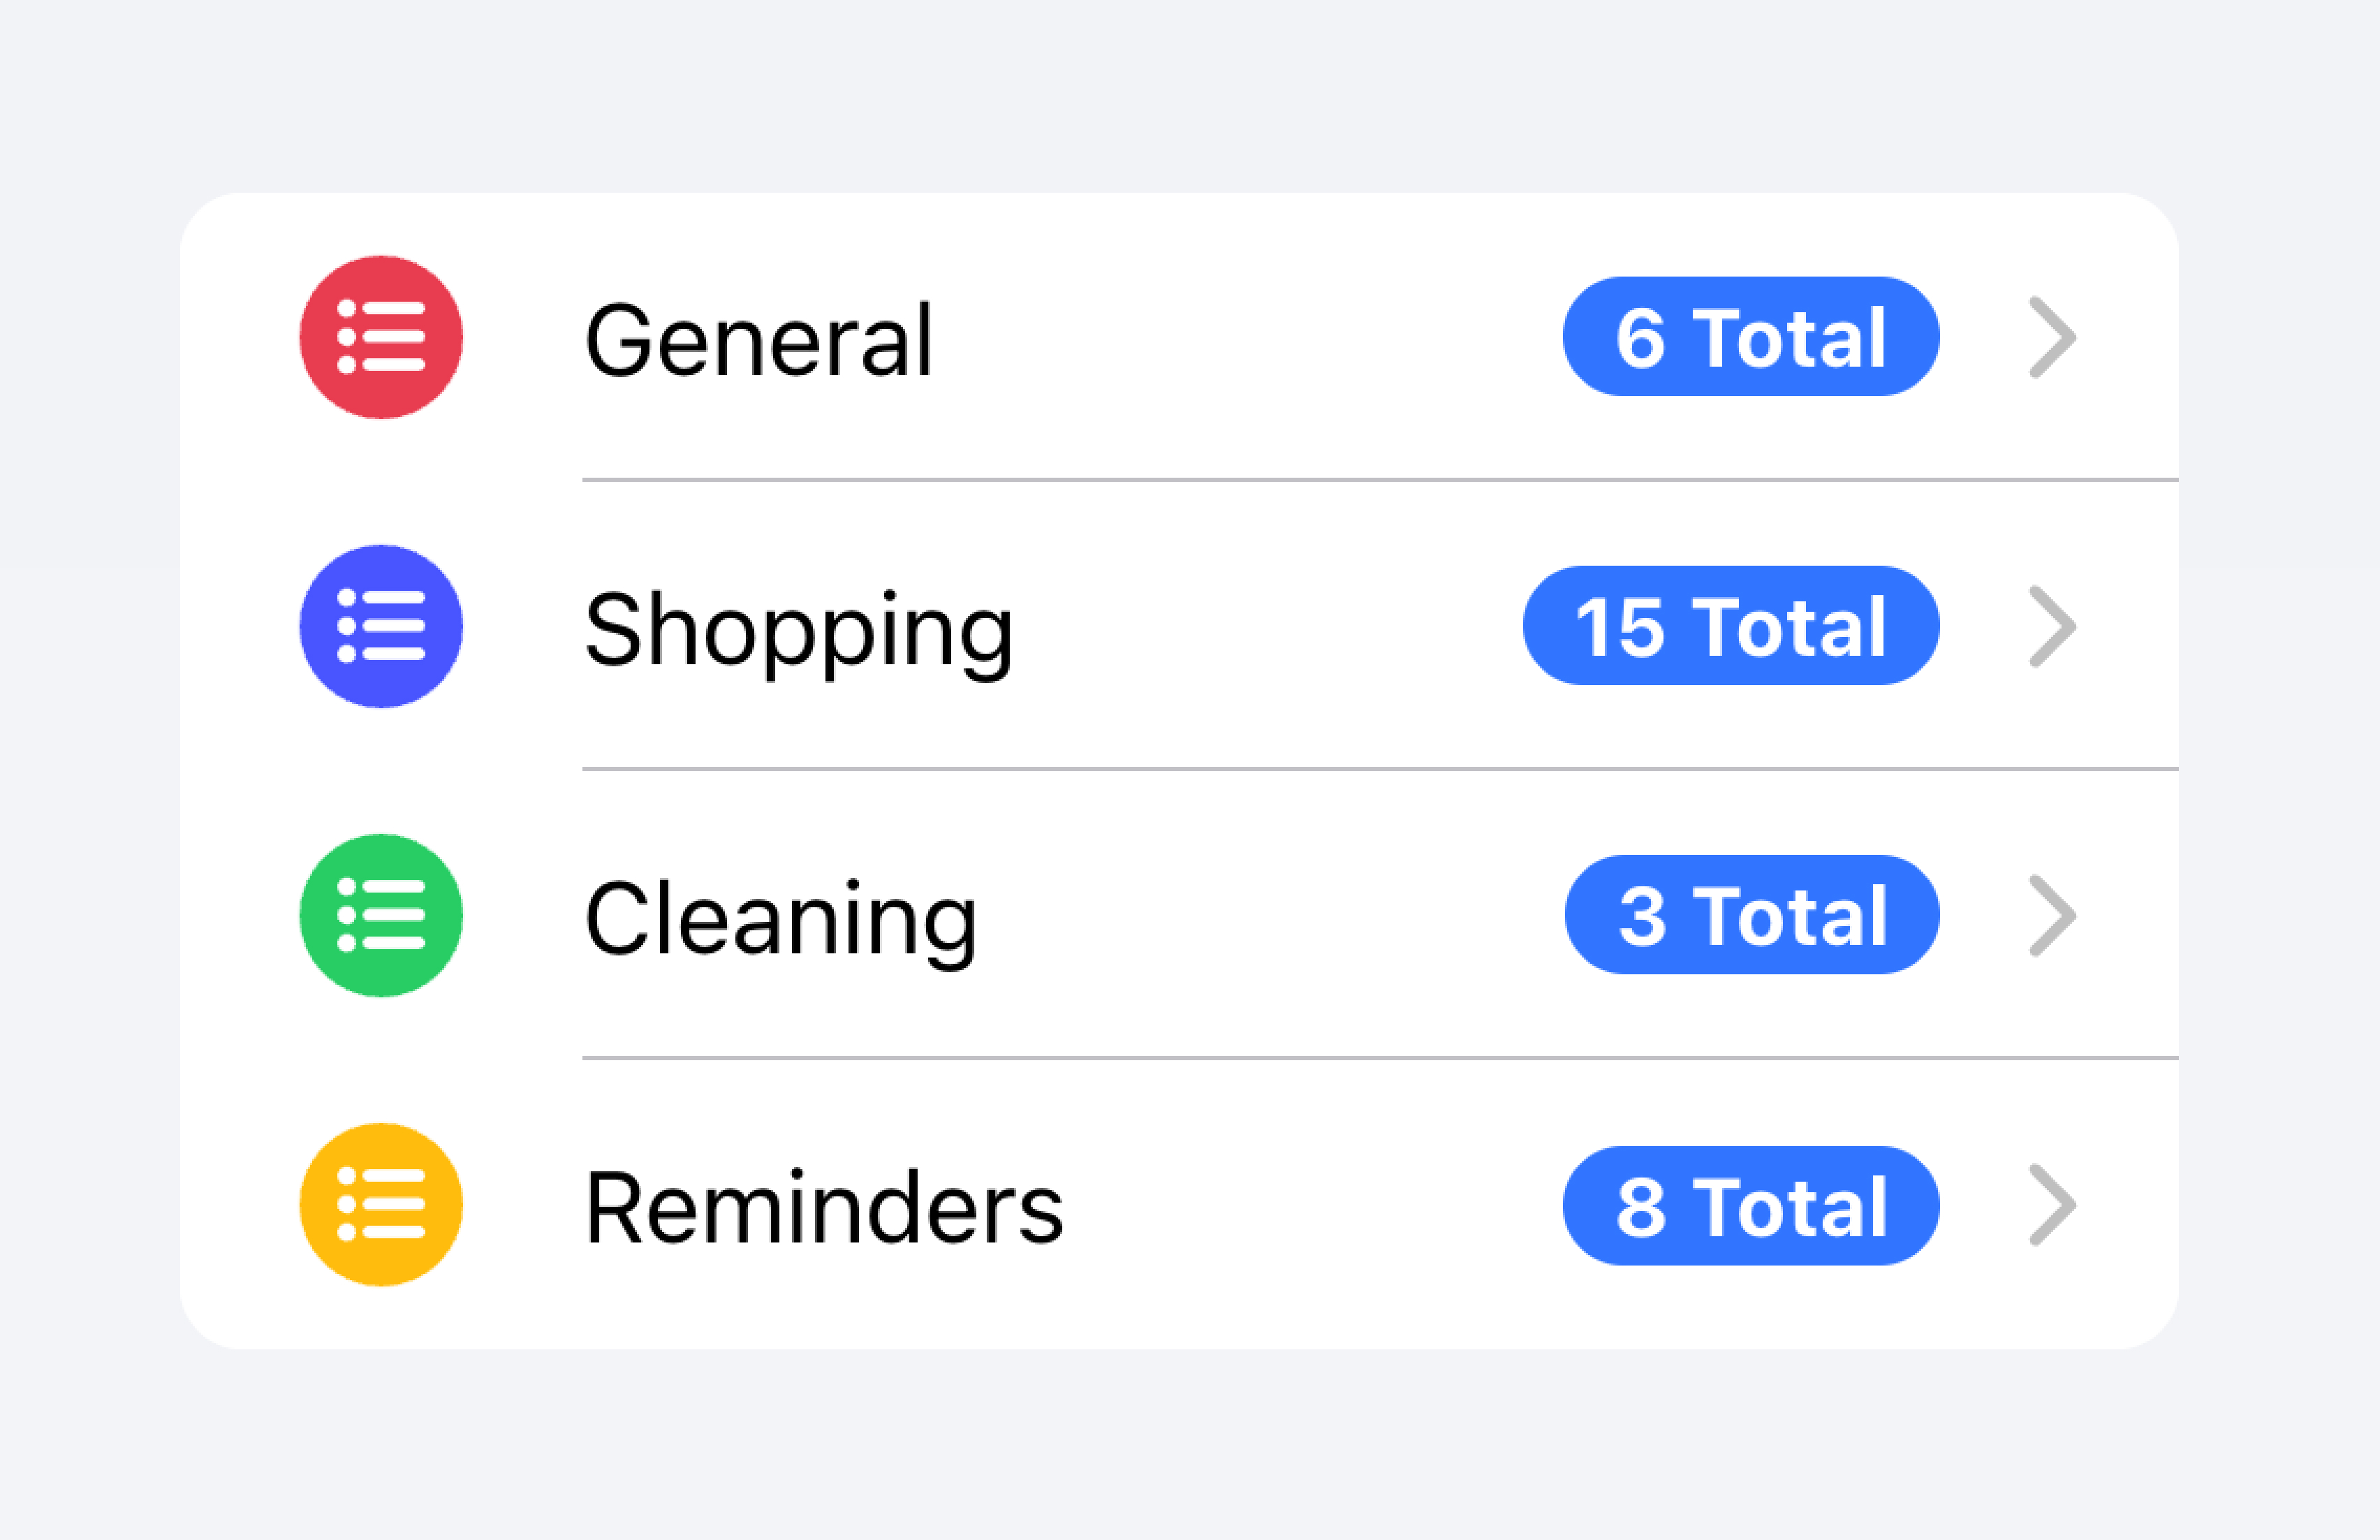 A list that contains several items, each representing a different to-do list. A count of how many tasks in each to-do list is placed at the end of each item. However, the count is highlighted in blue which draws the user's attention away from the name of the to-do list.